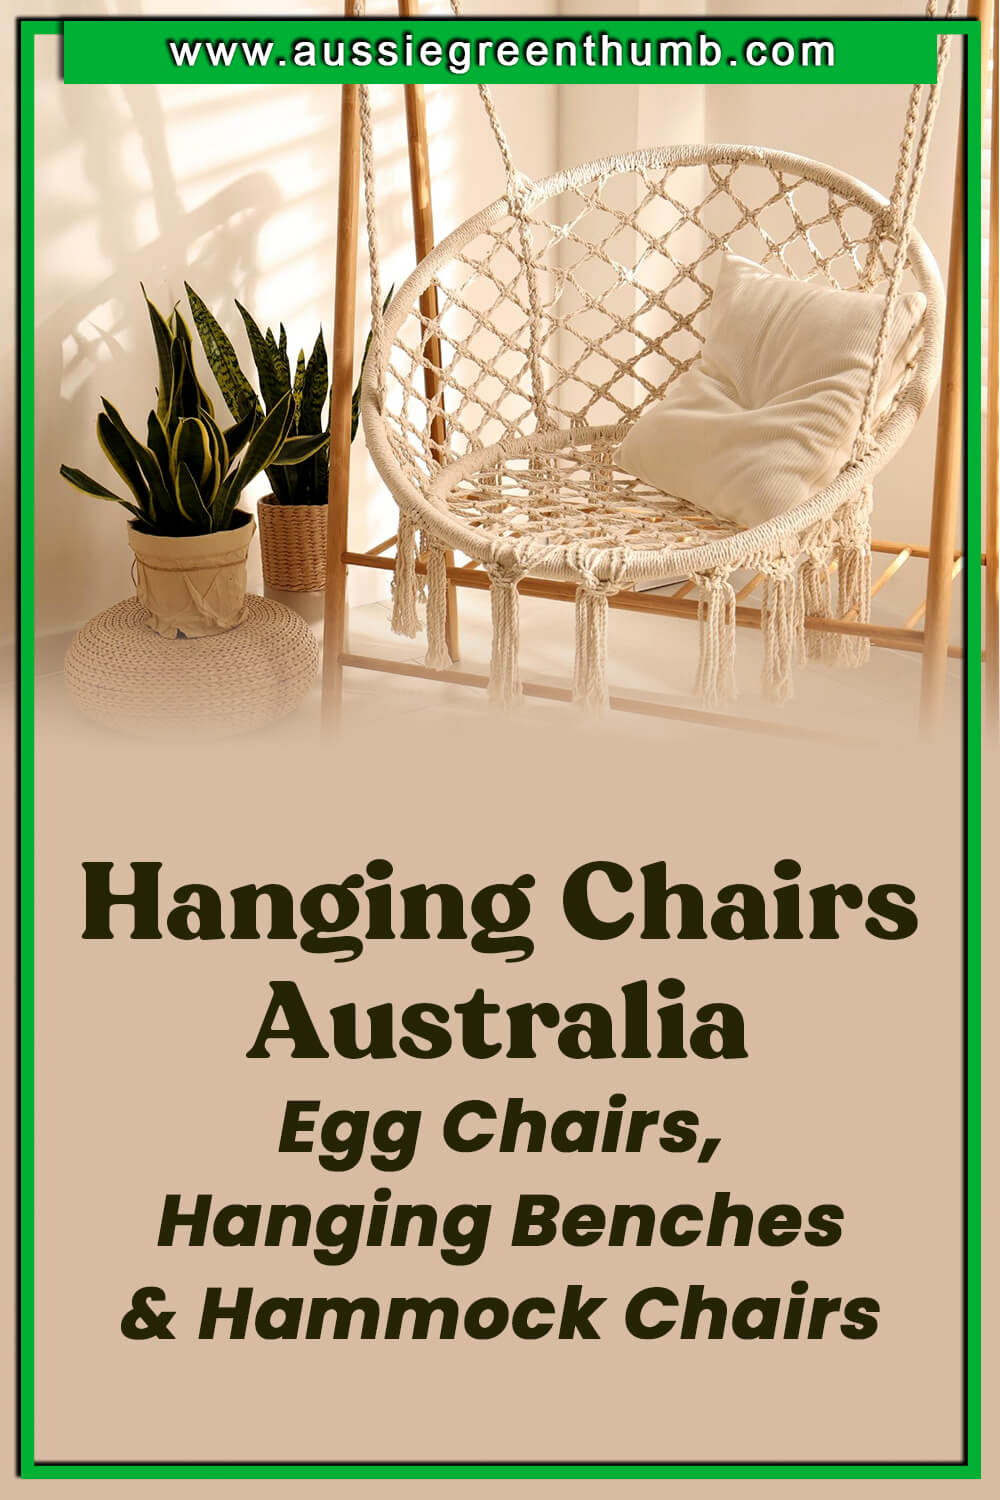 Best Hanging Chairs Australia Egg Chairs, Hanging Benches and Hammock Chairs